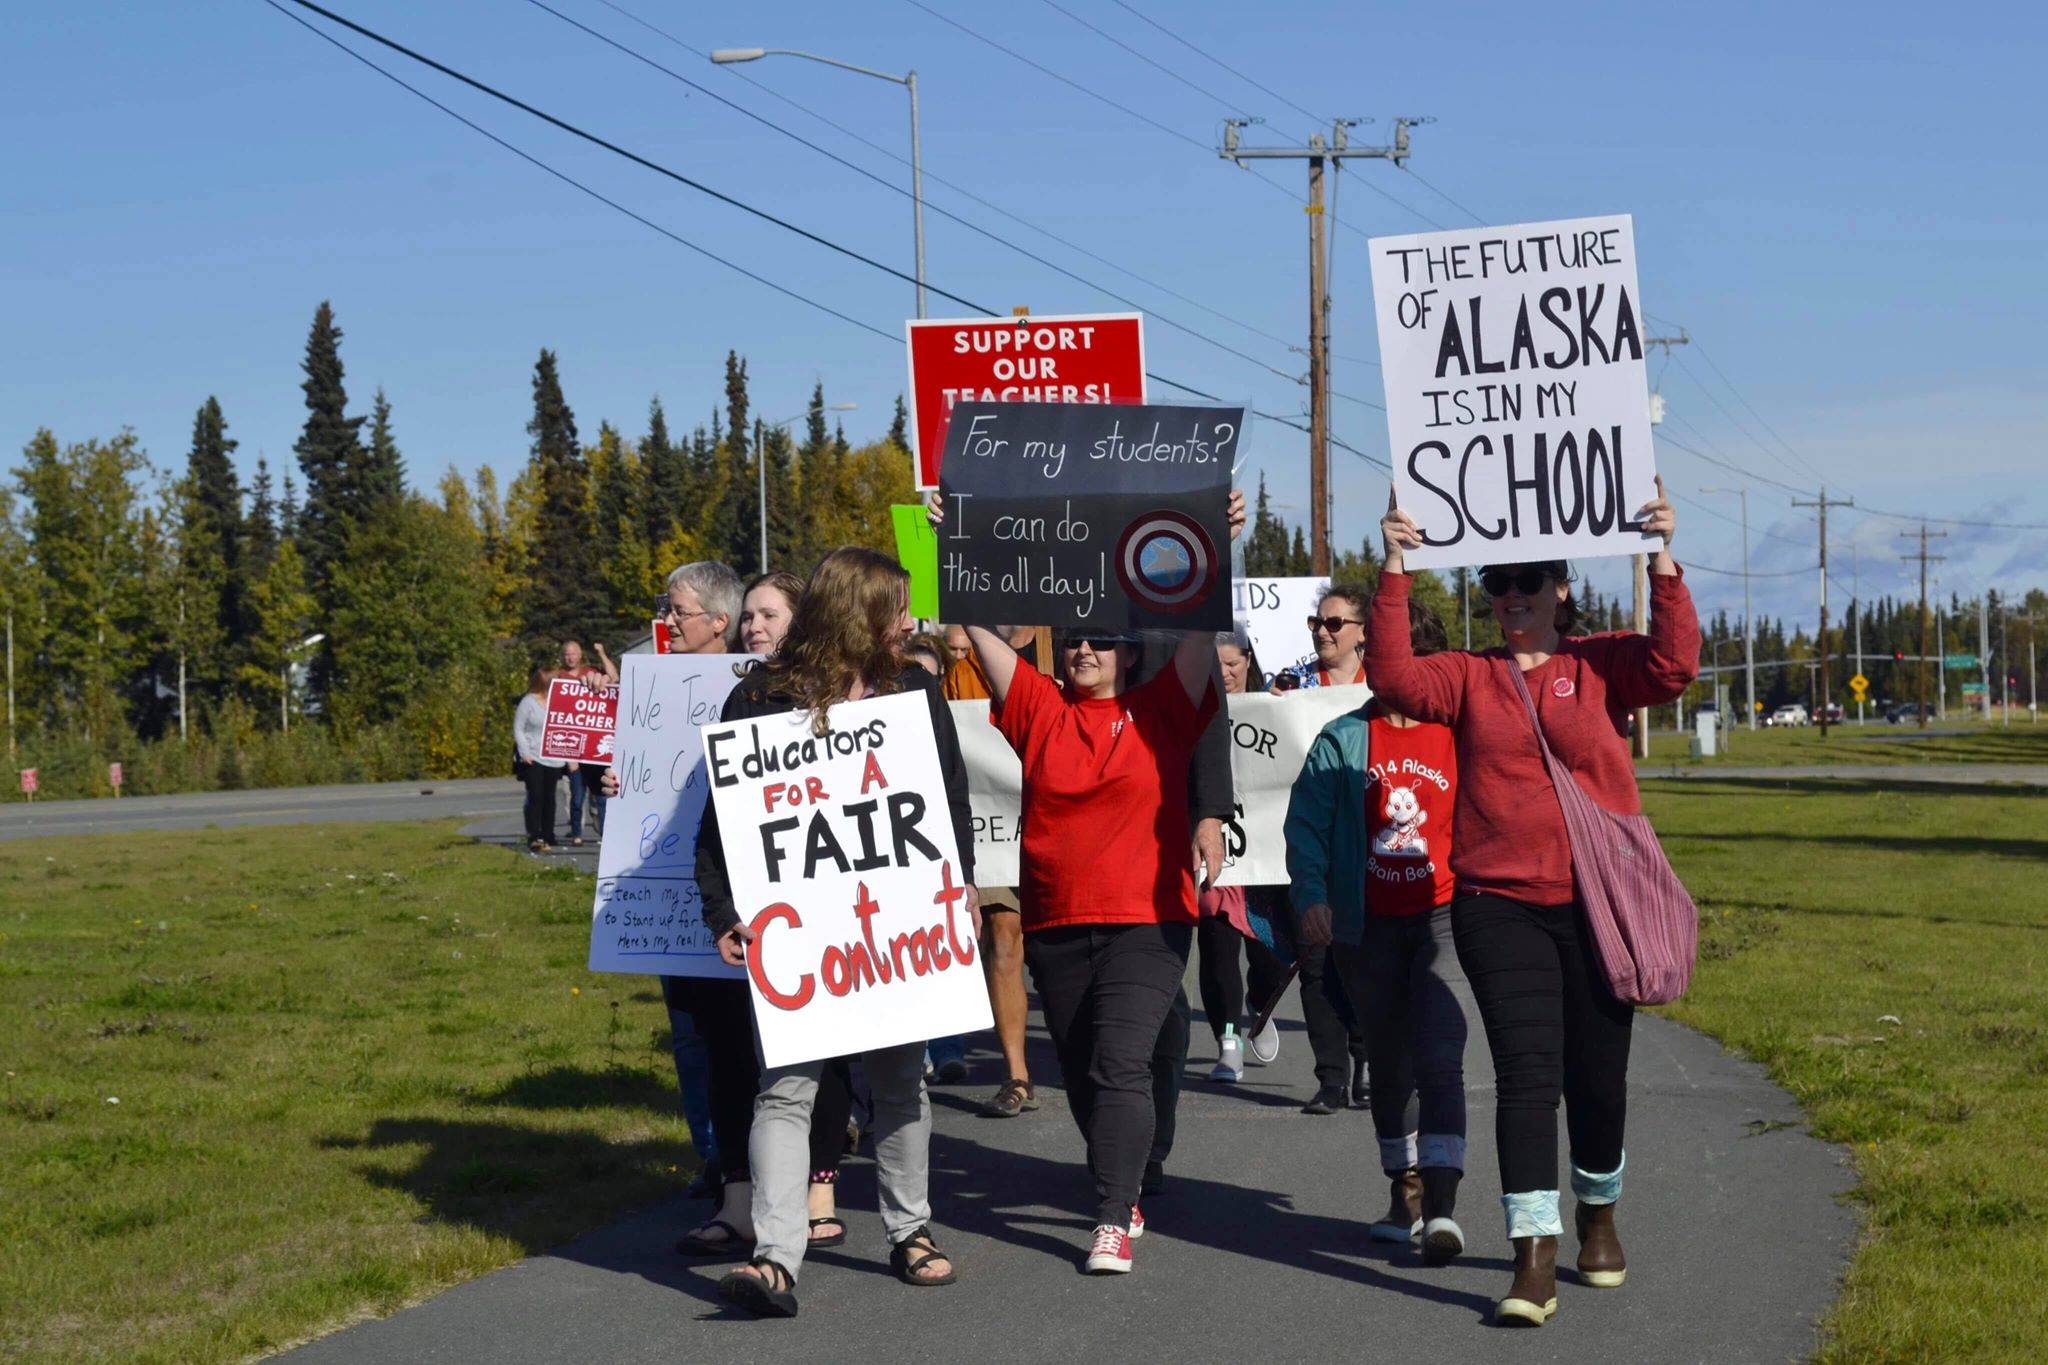 Educators rally in front of Kenai Central High School after school ahead of a strike called on by two employee associations, on Monday, Sept. 16, 2019, in Kenai, Alaska. (Photo by Victoria Petersen/Peninsula Clarion)